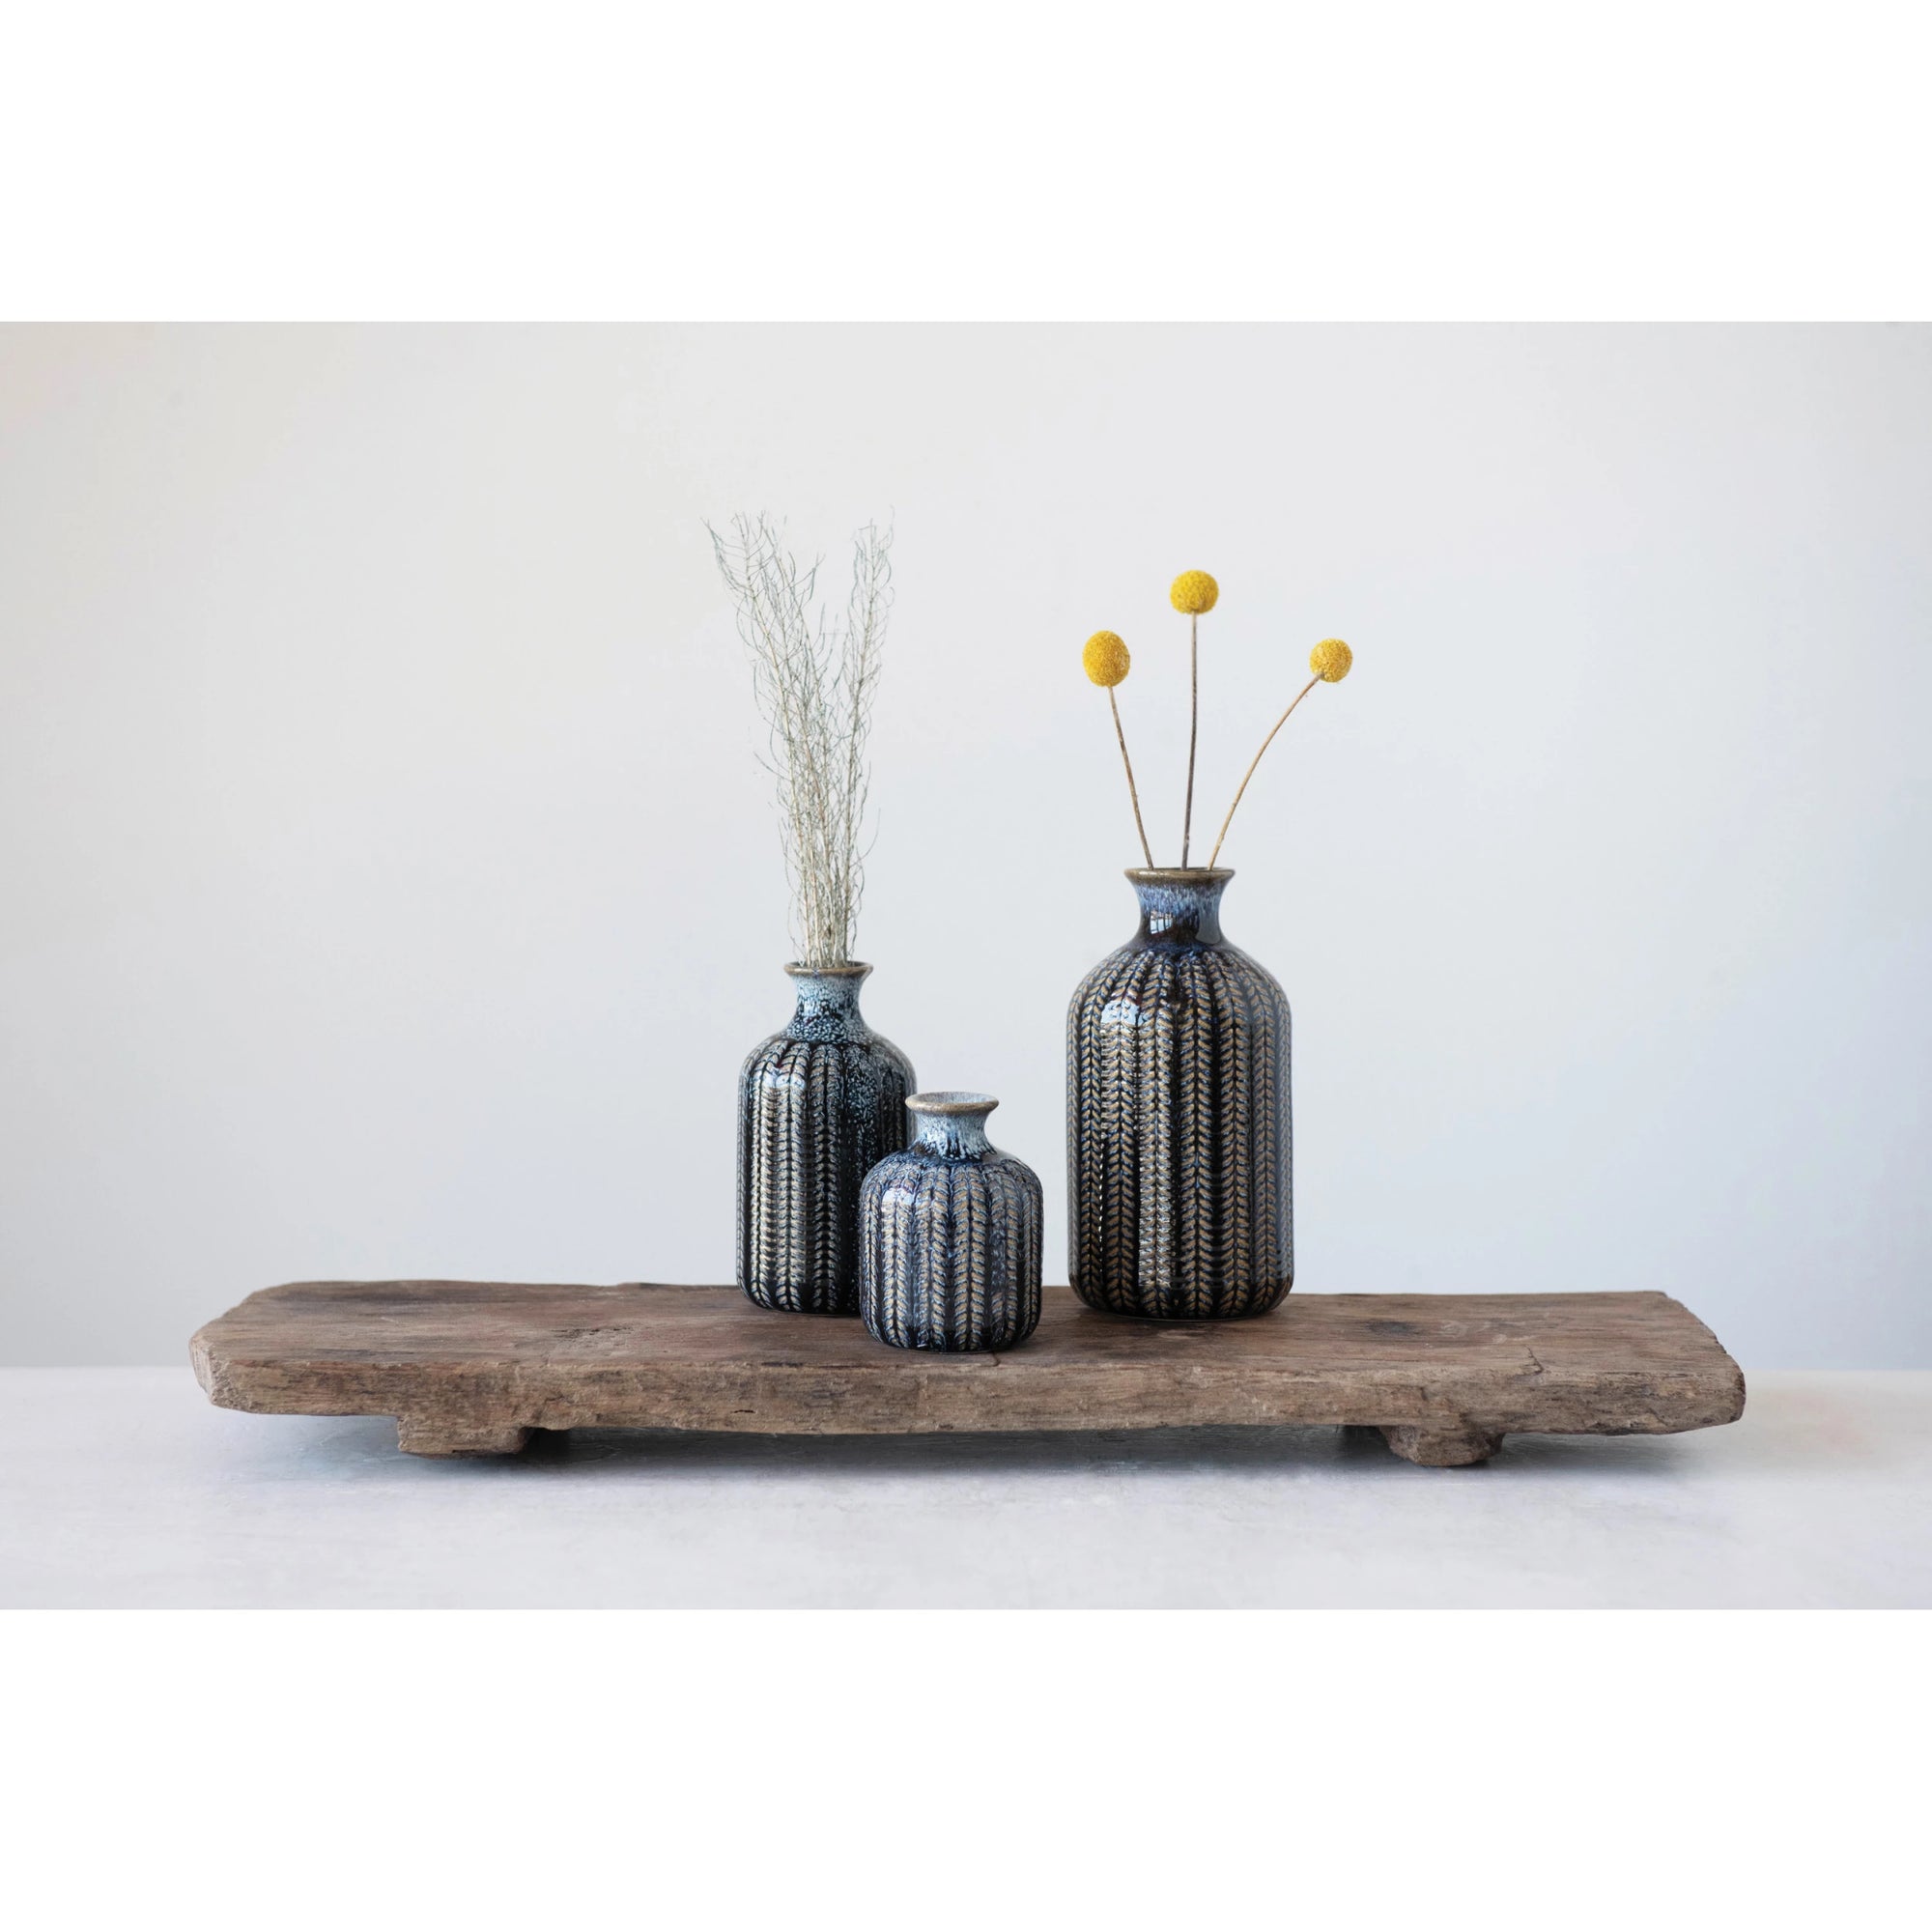 Small, Medium, and Large embossed glazed stoneware vases in deep blue color